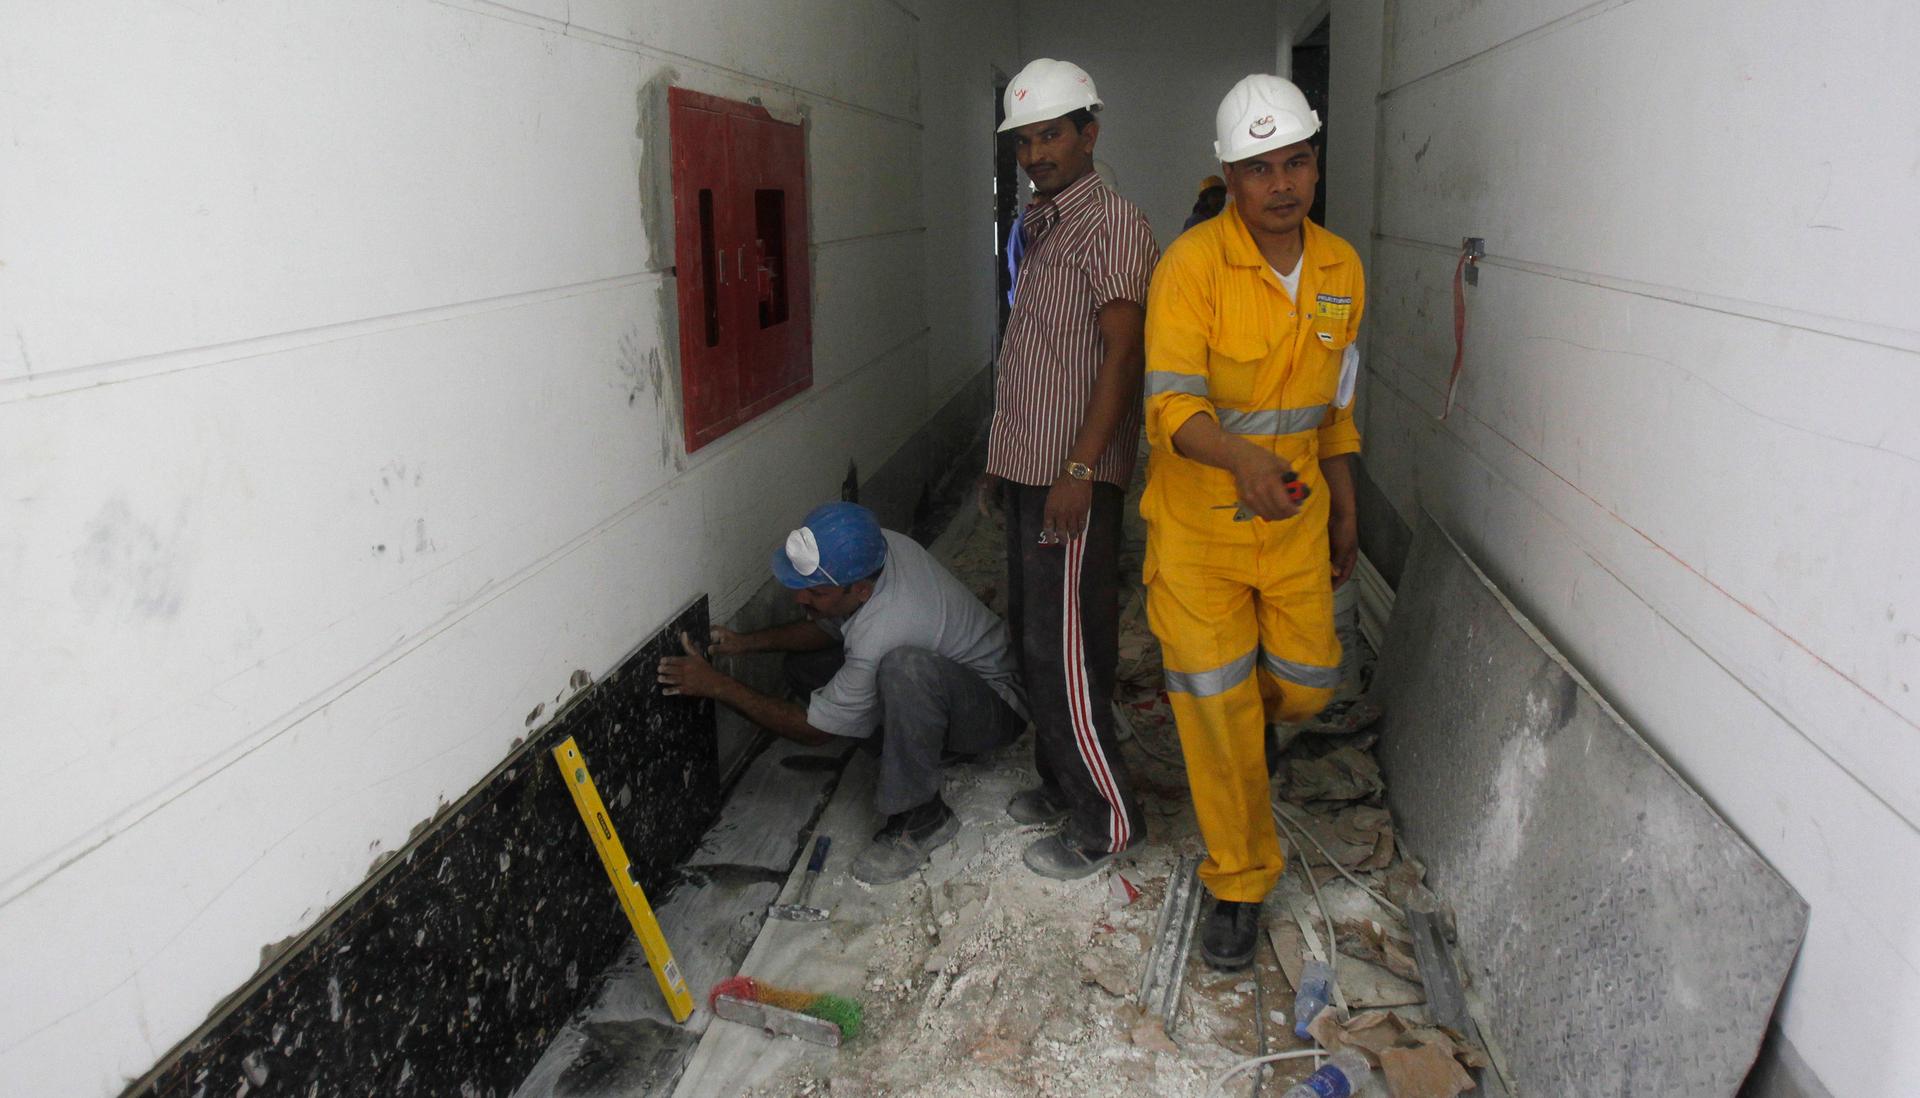 Laborers work at a construction site in Doha on June 18, 2012.